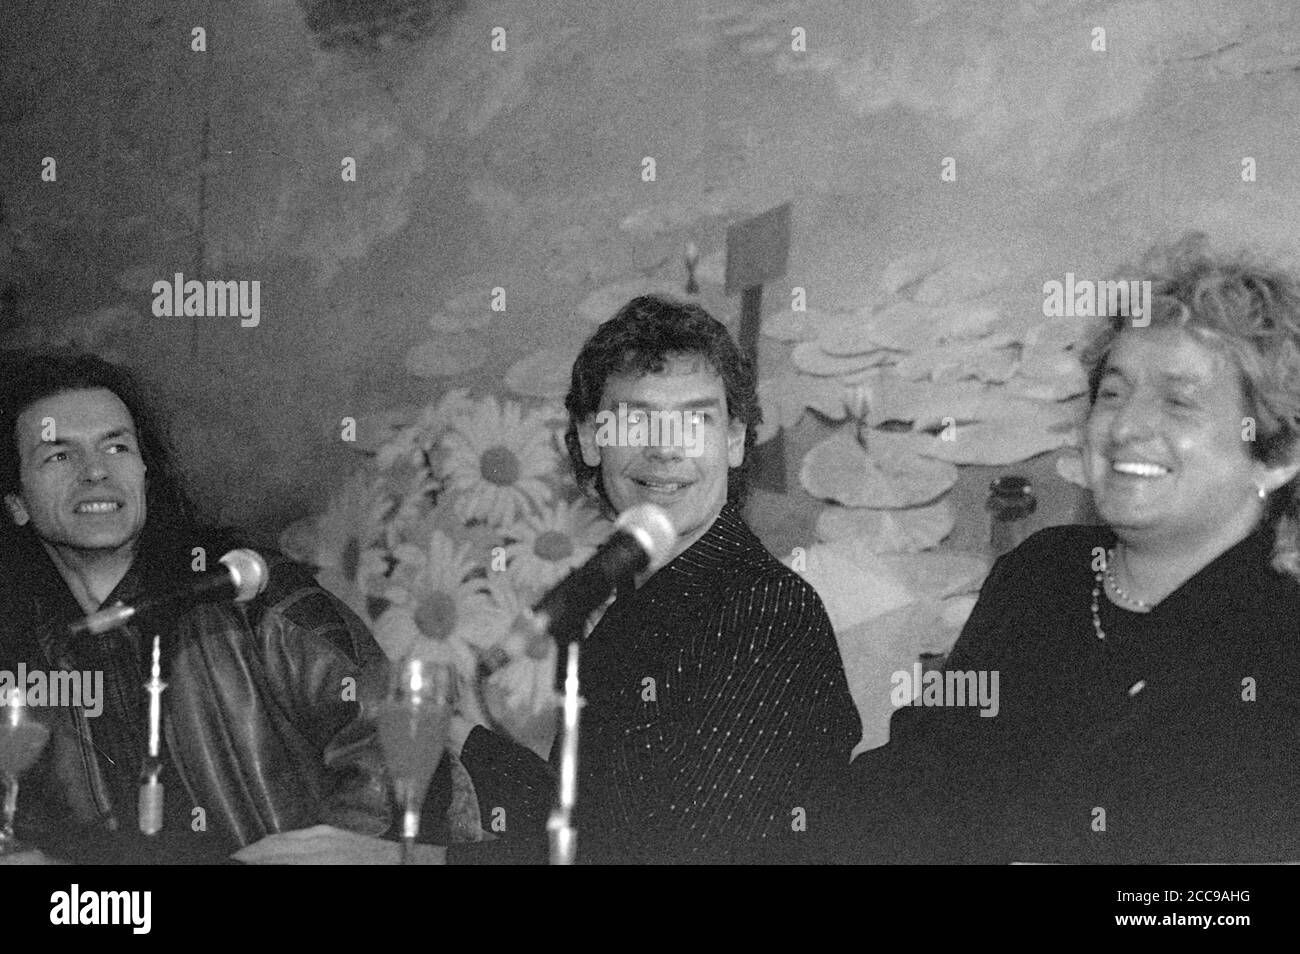 Steve Howe, Bill Bruford and Jon Anderson from AWBH - Anderson, Bruford, Wakeman, Howe at a press conference in a hotel. London, June 18, 1989 | usage worldwide Stock Photo